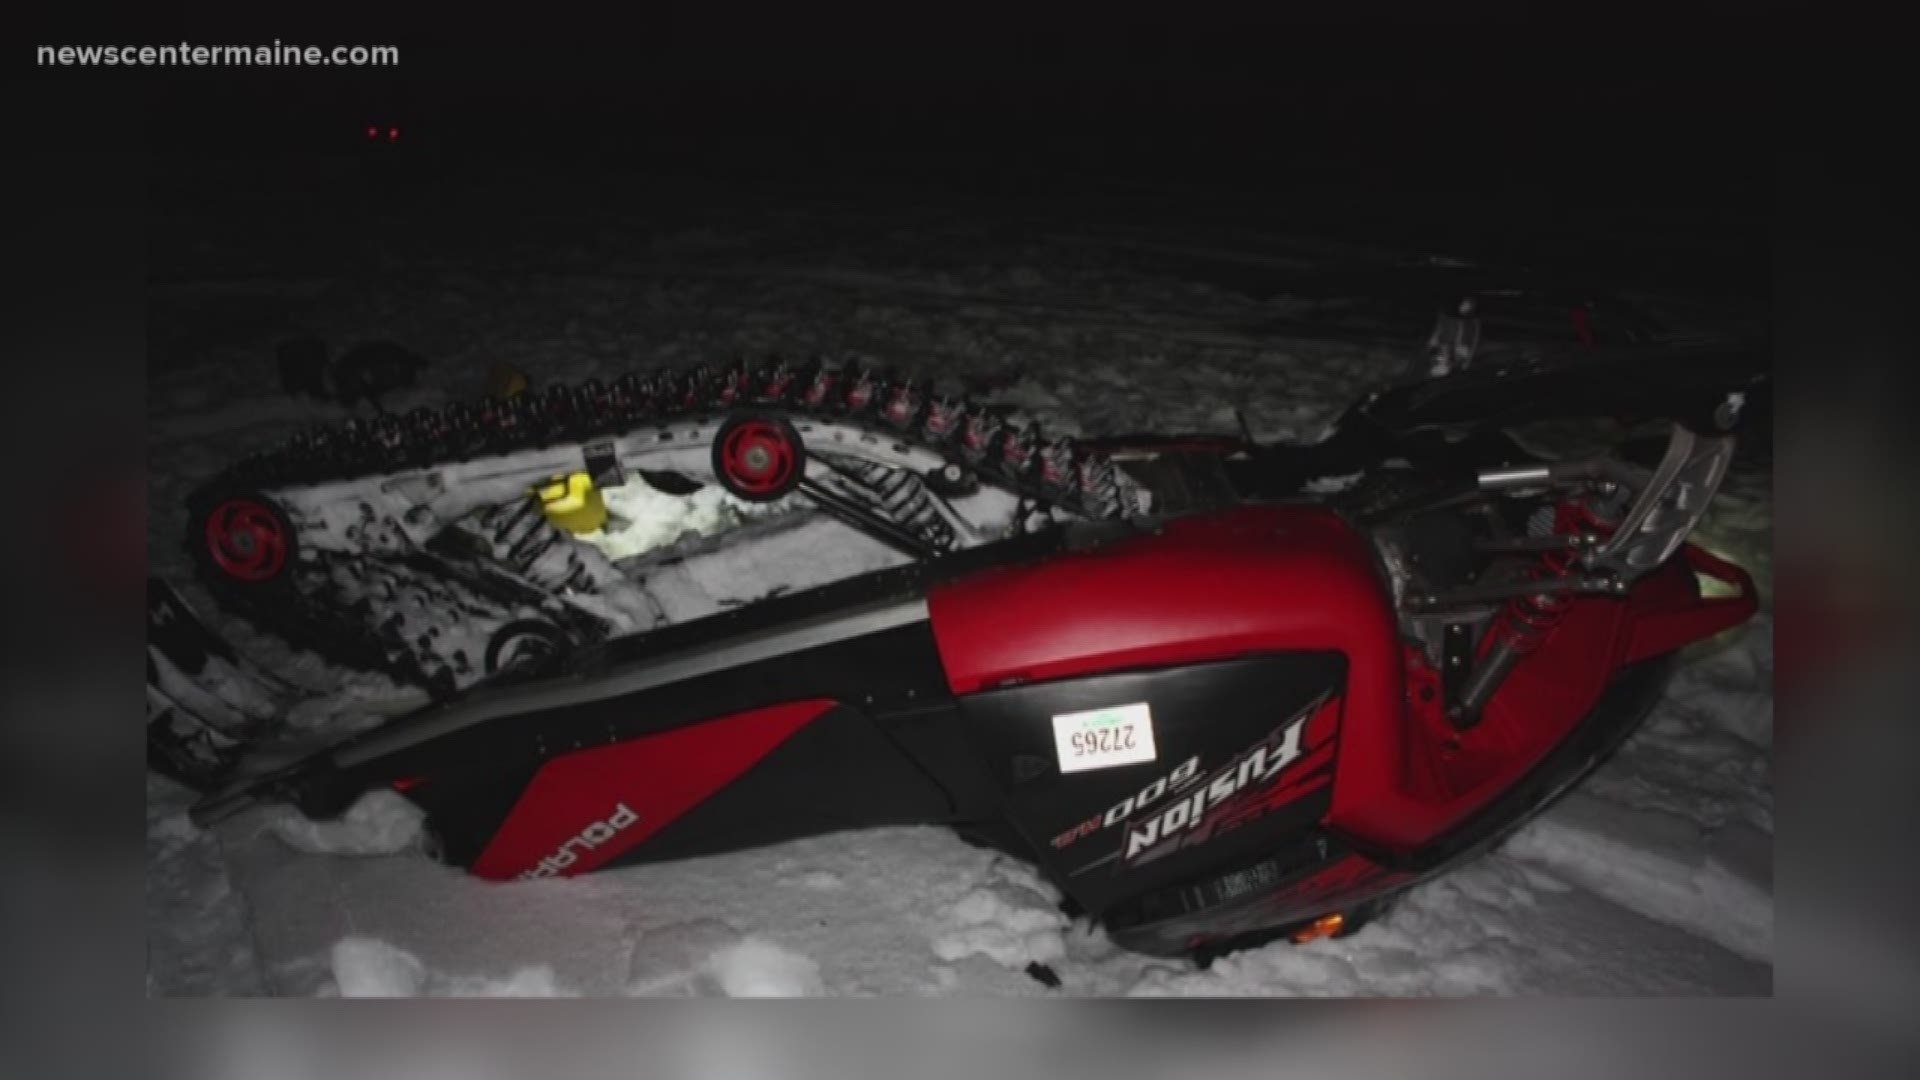 A middle-aged woman and a young boy were killed in separate snowmobile accidents Saturday.